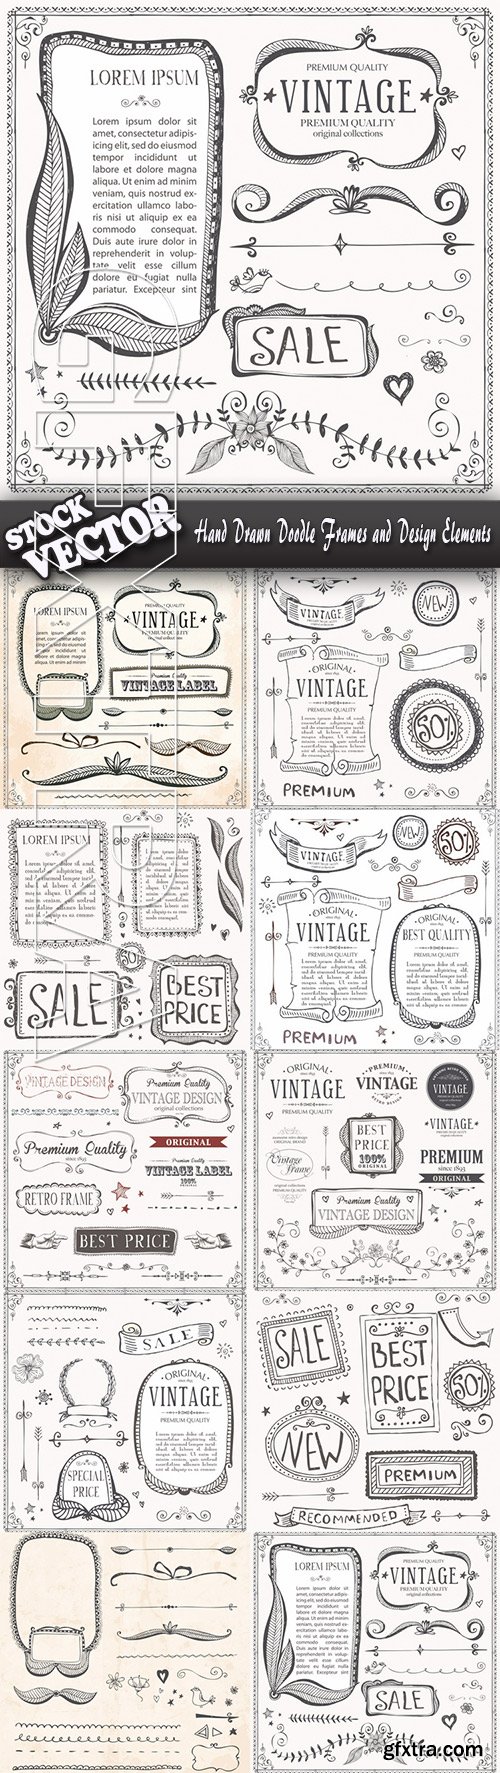 Stock Vector - Hand Drawn Doodle Frames and Design Elements